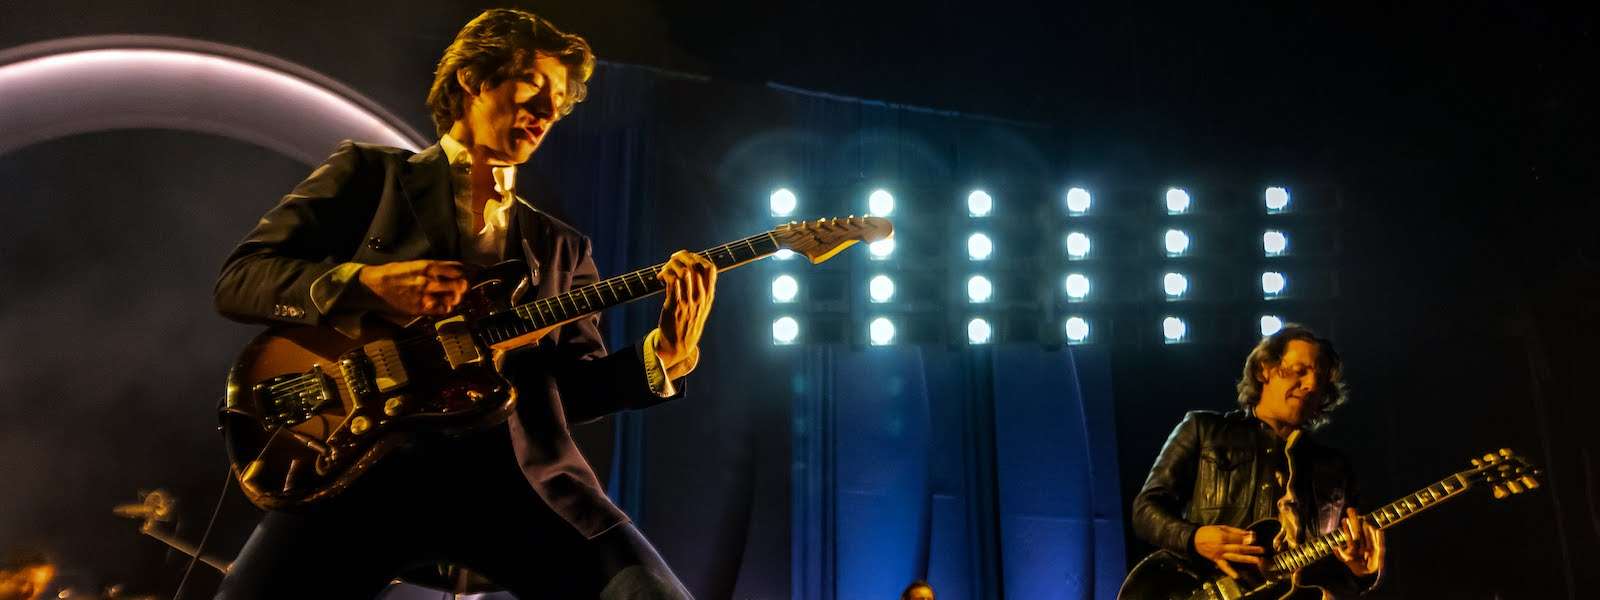 Arctic Monkeys Play United Center on North American Tour [REVIEW]